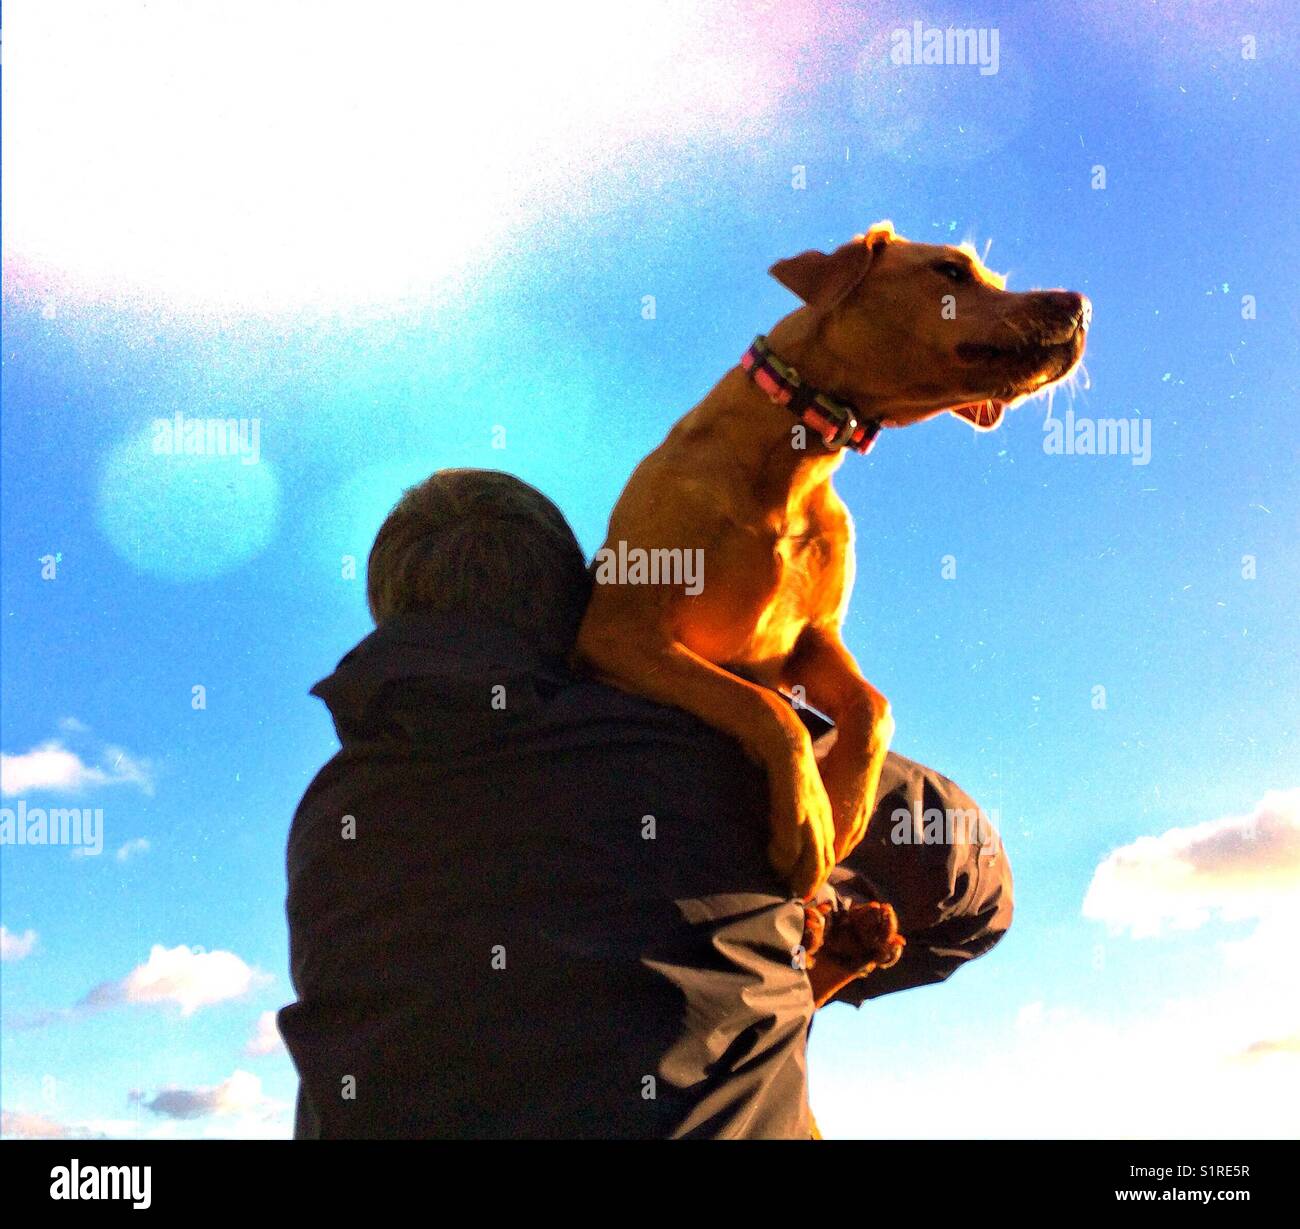 A macho man carrying his dog into a sunset Stock Photo